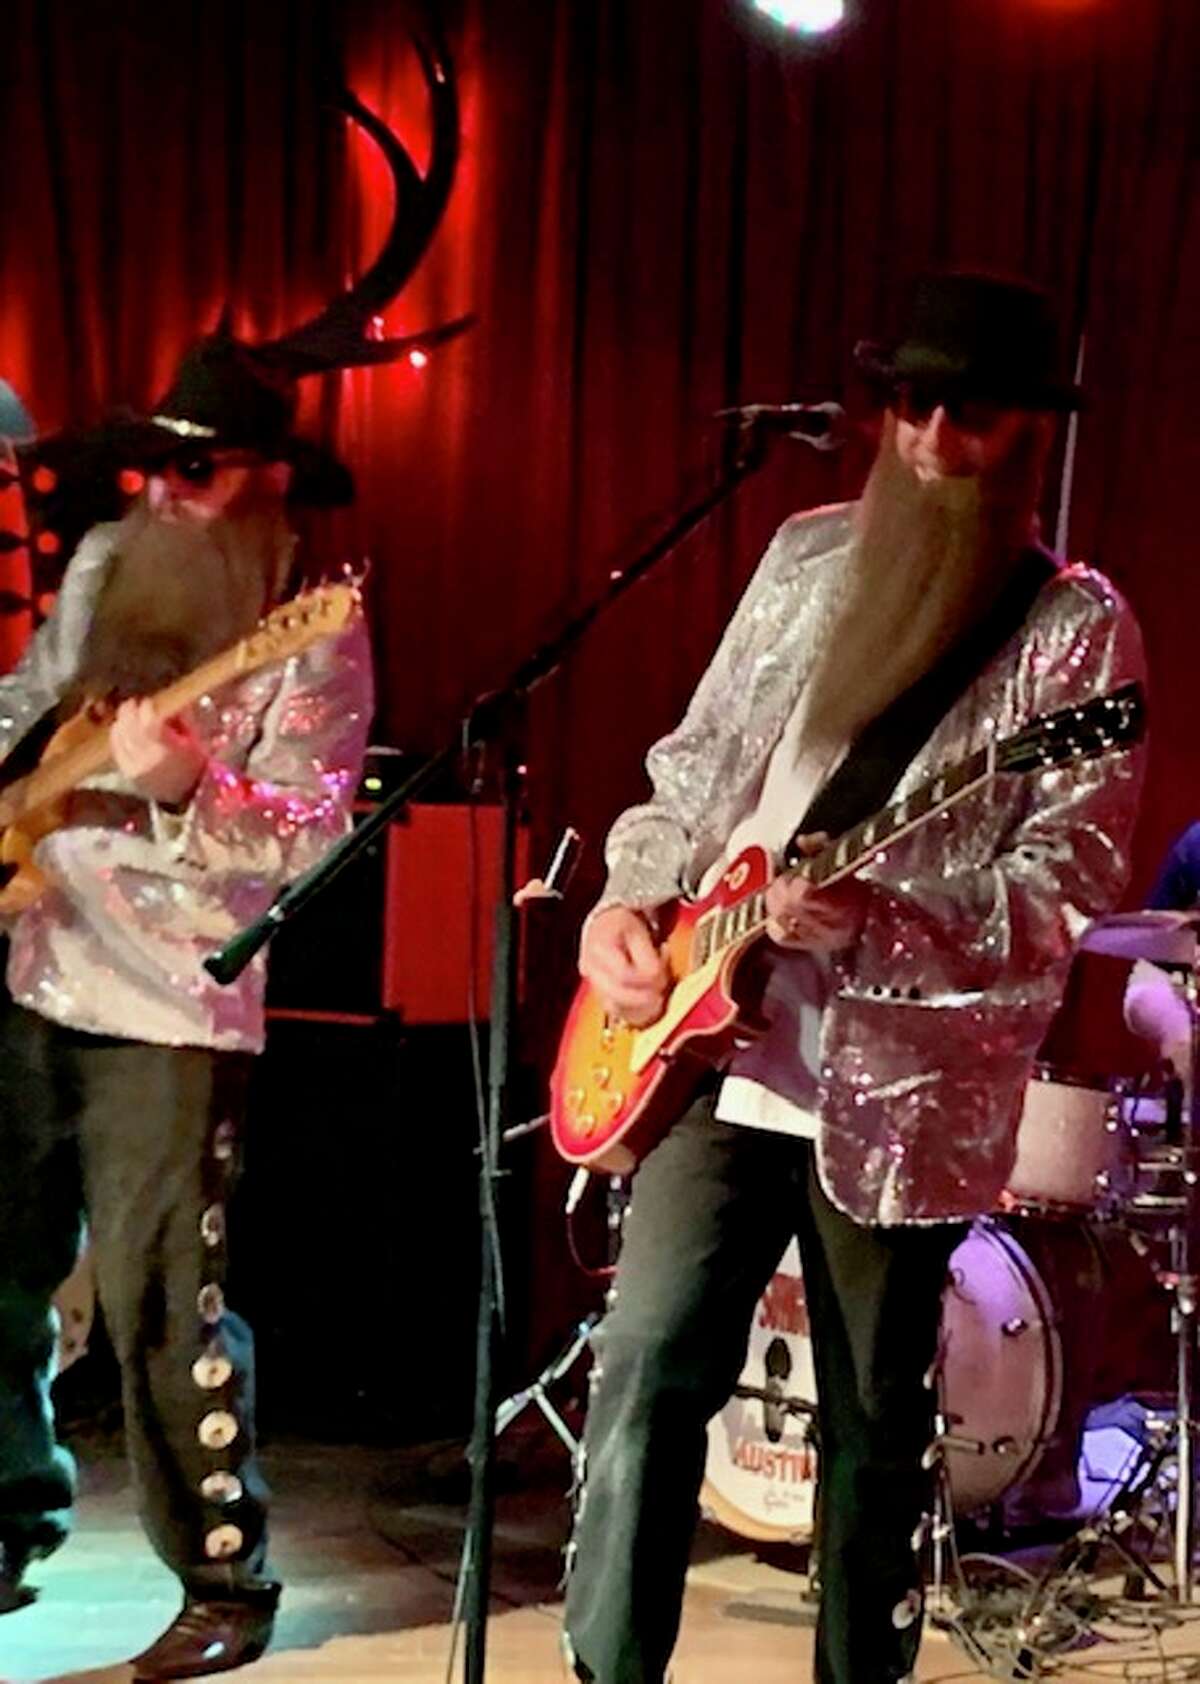 Cheap Sunglasses $40 to $110 8:30 p.m. February 26. A ZZ Top tribute band will perform with the signature moves and sounds that made the Texas duo famous. Sam's Burger Joint 330 East Grayson St